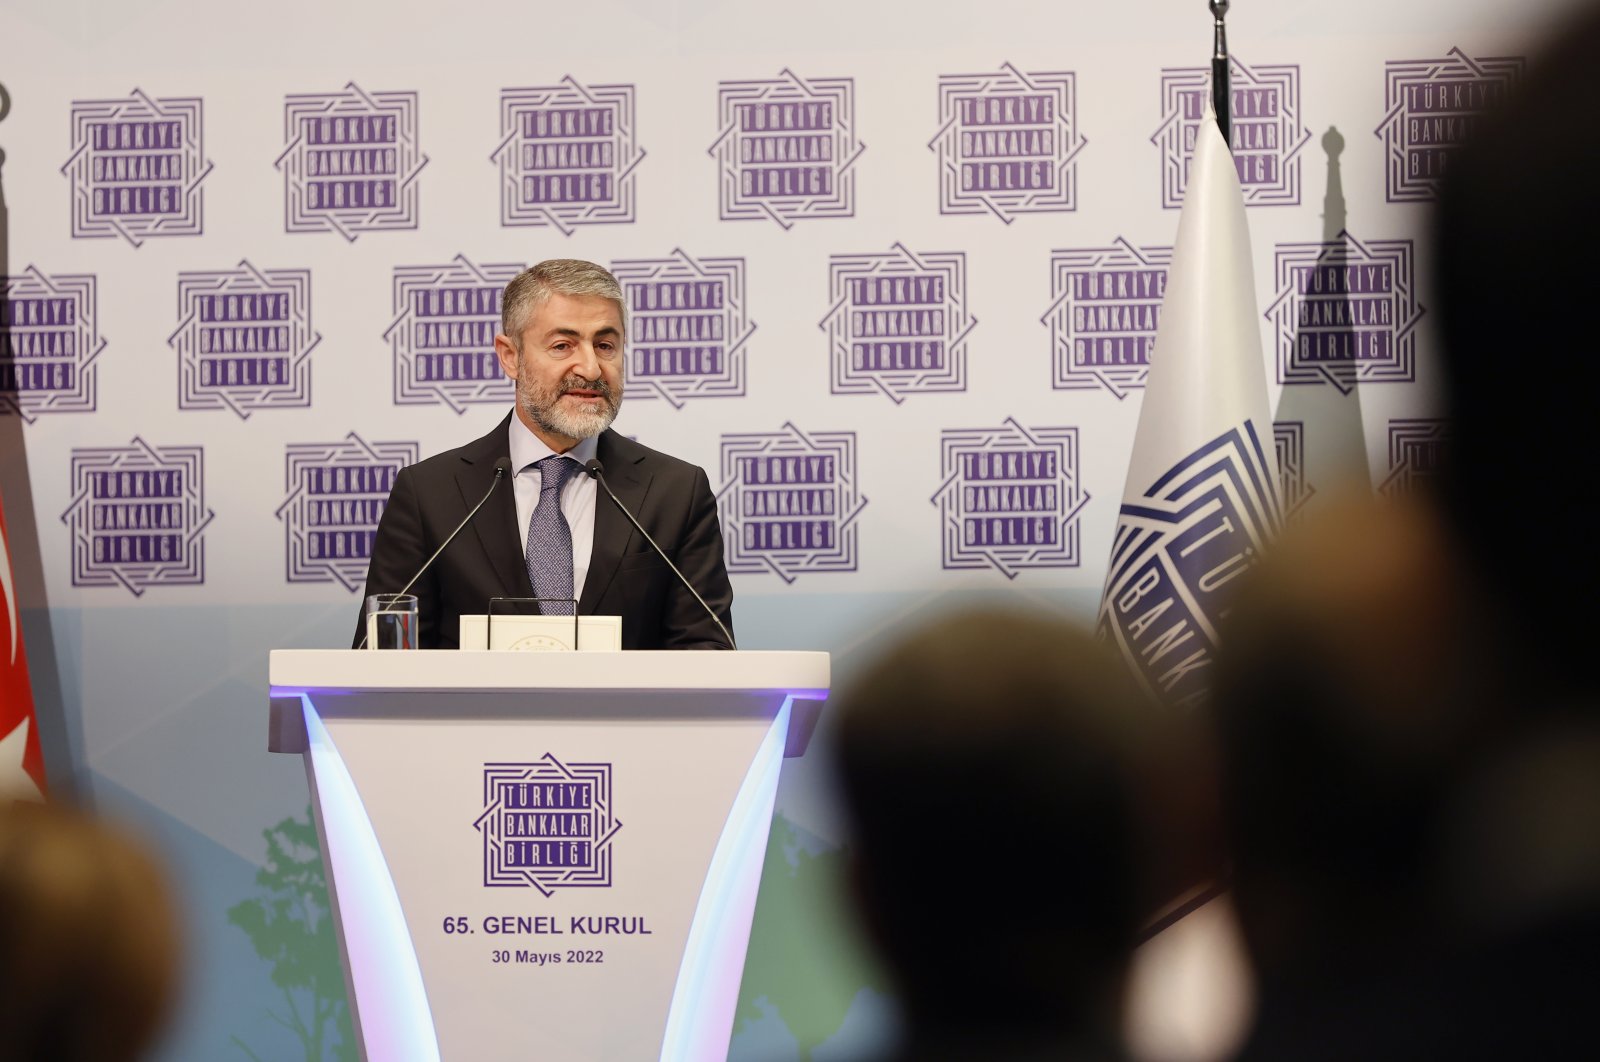 Treasury and Finance Minister Nureddin Nebati speaks at the 65th General Assembly of the Banks Association of Turkey (TBB), Istanbul, Turkey, May 30, 2022. (AA Photo)